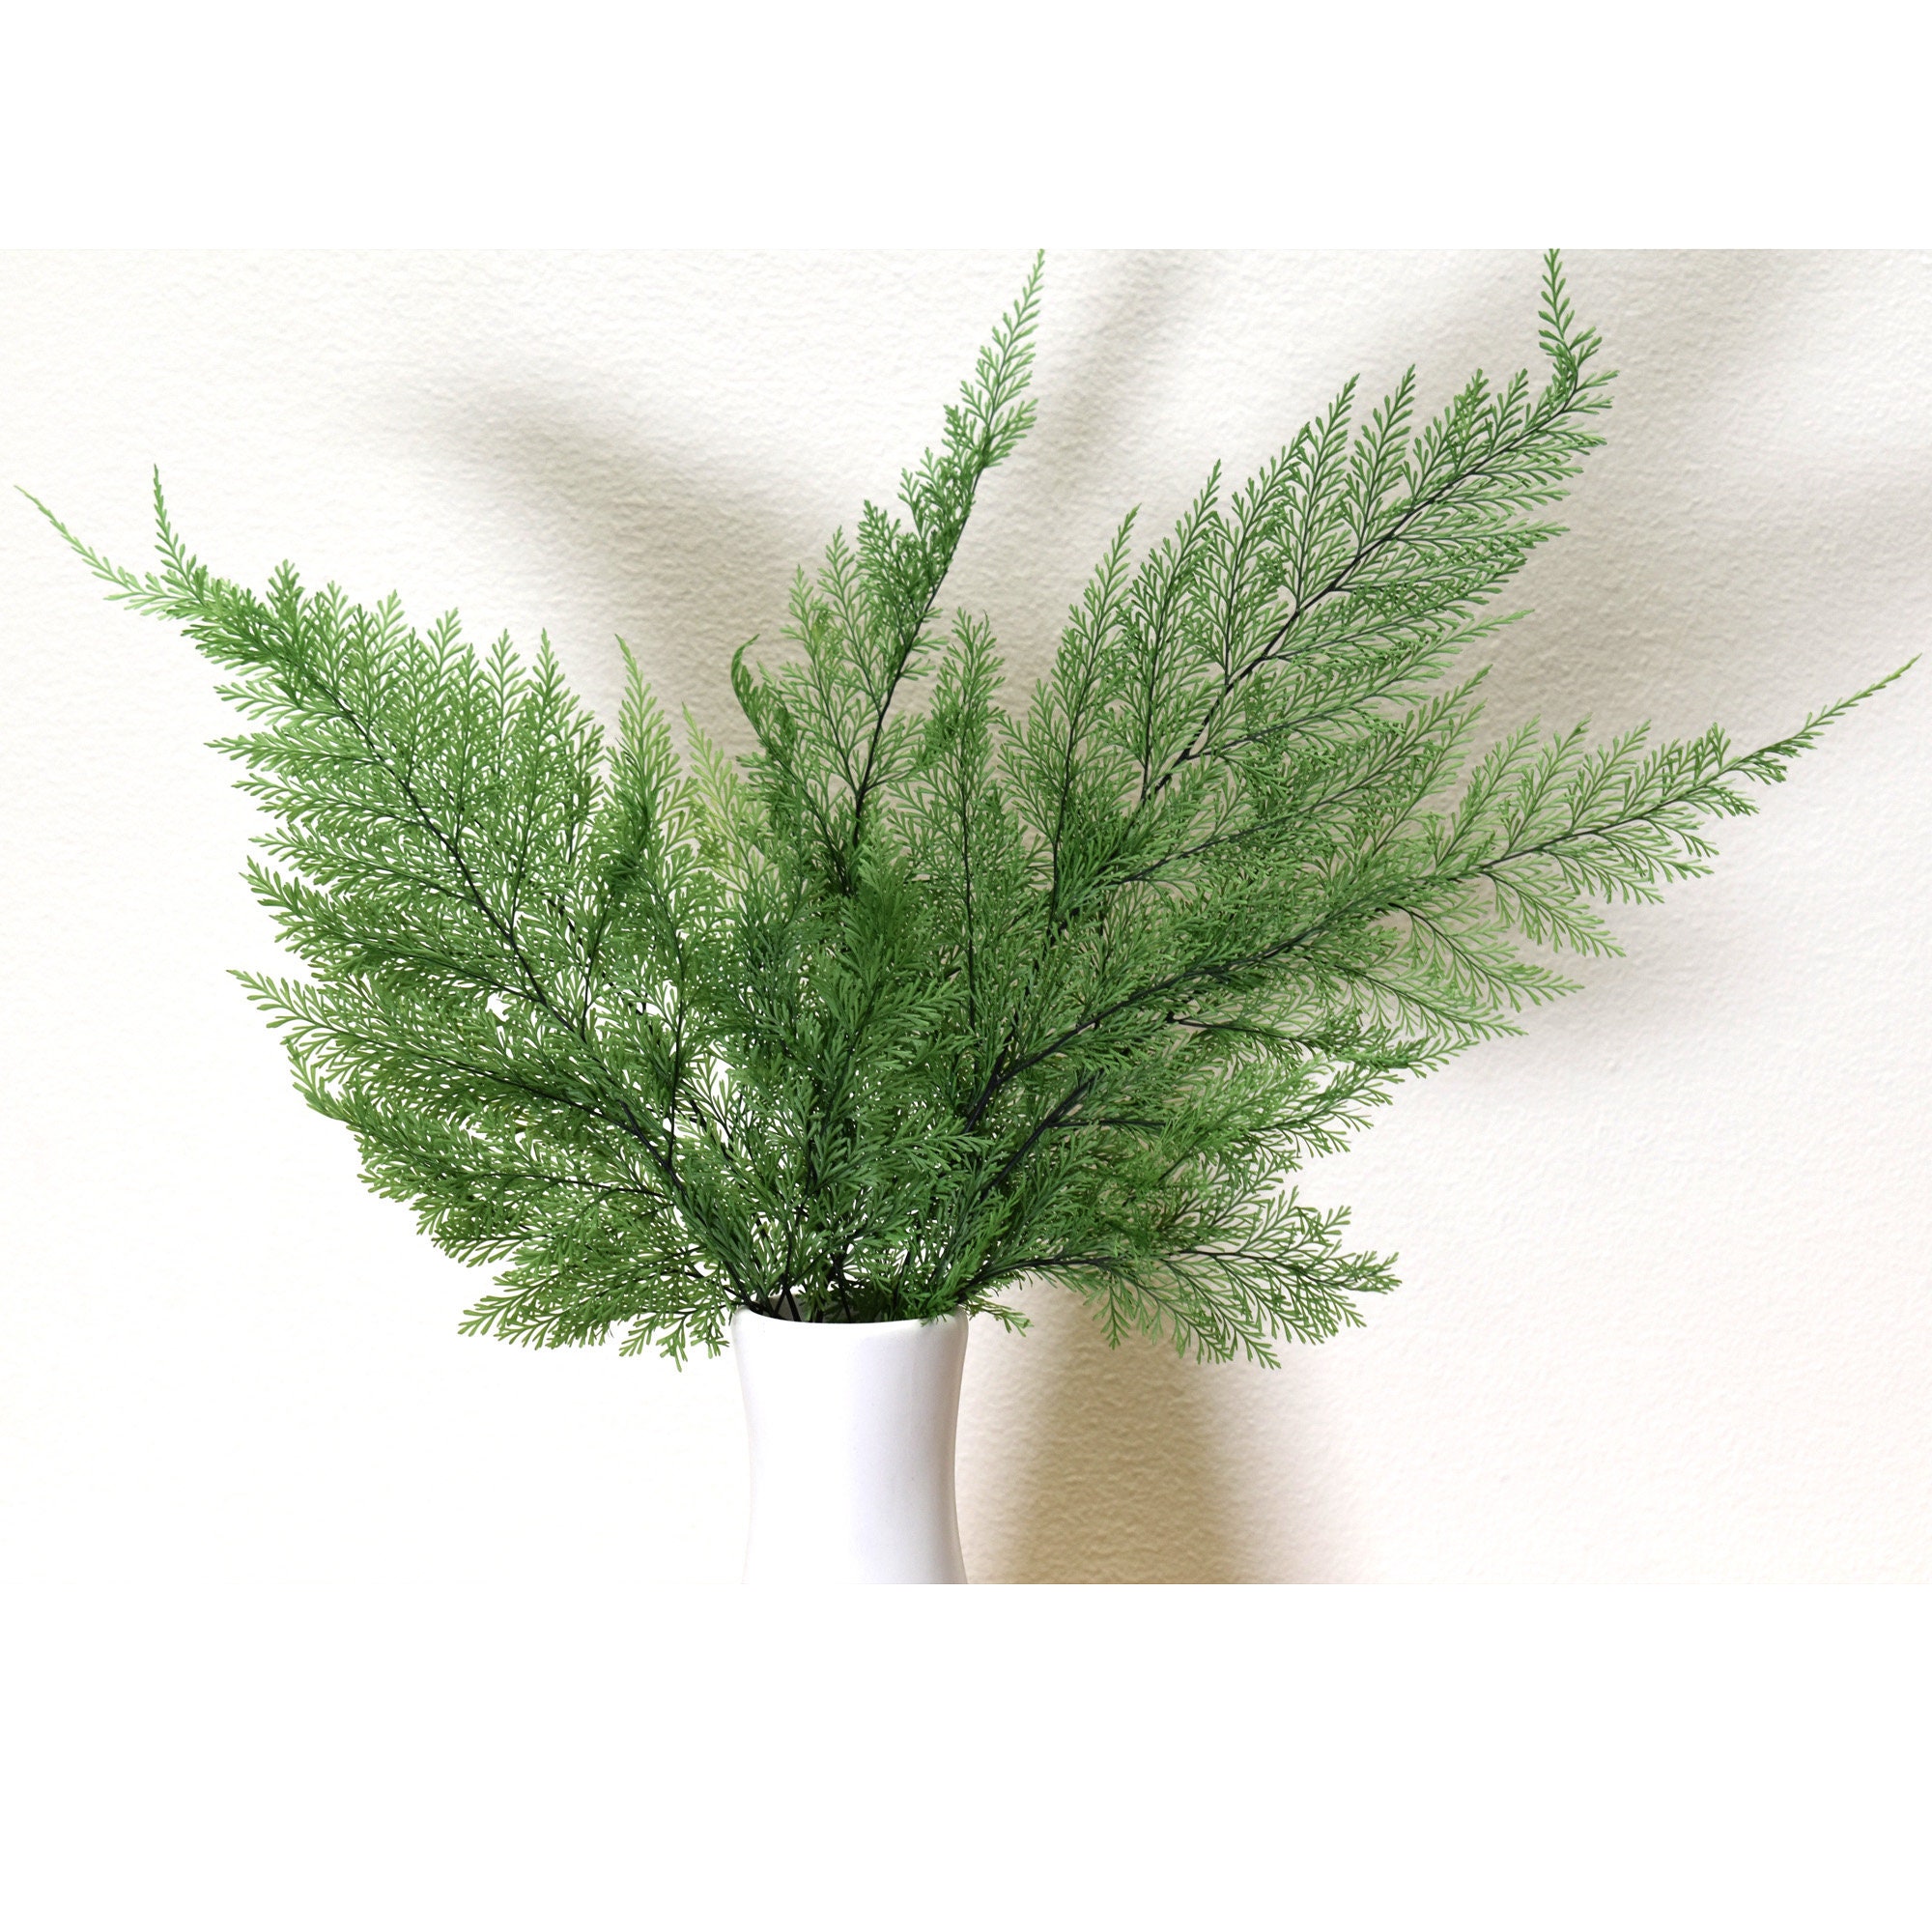 Large Preserved Fern Leaves White Dried Flowers - 10 PCS Real Dried Fern,  100% Natural Greenery for Christmas Decor, Wedding Invites, Home Decor